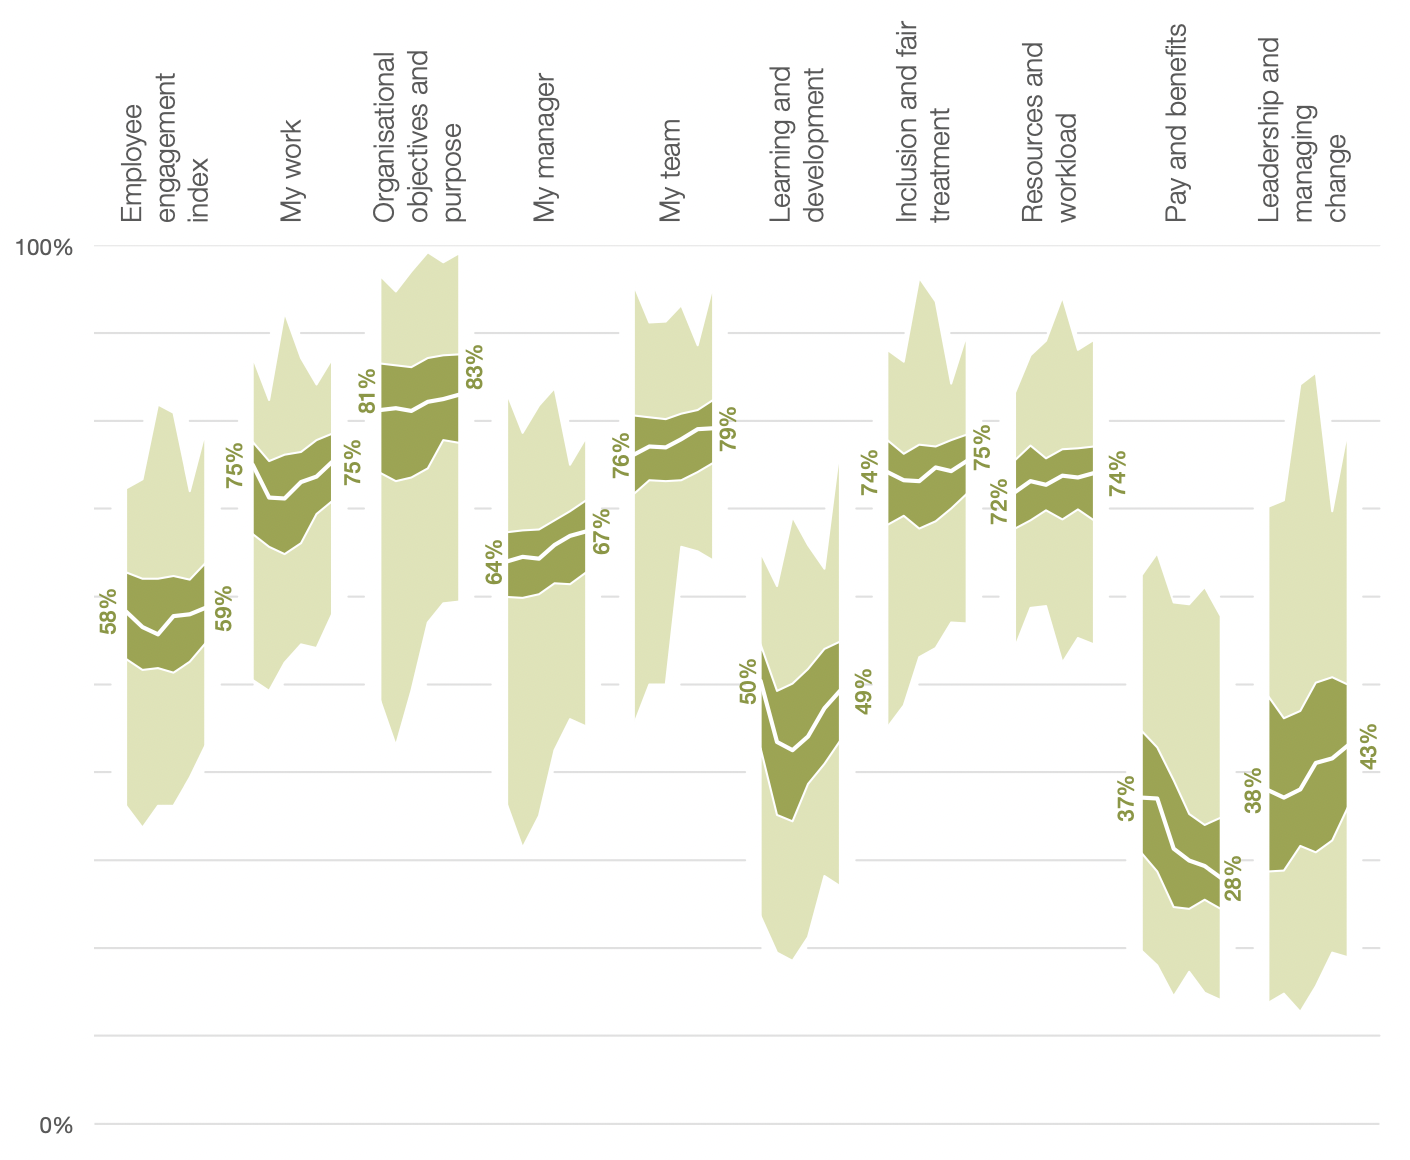 Summary of Civil Service People Survey scores over time